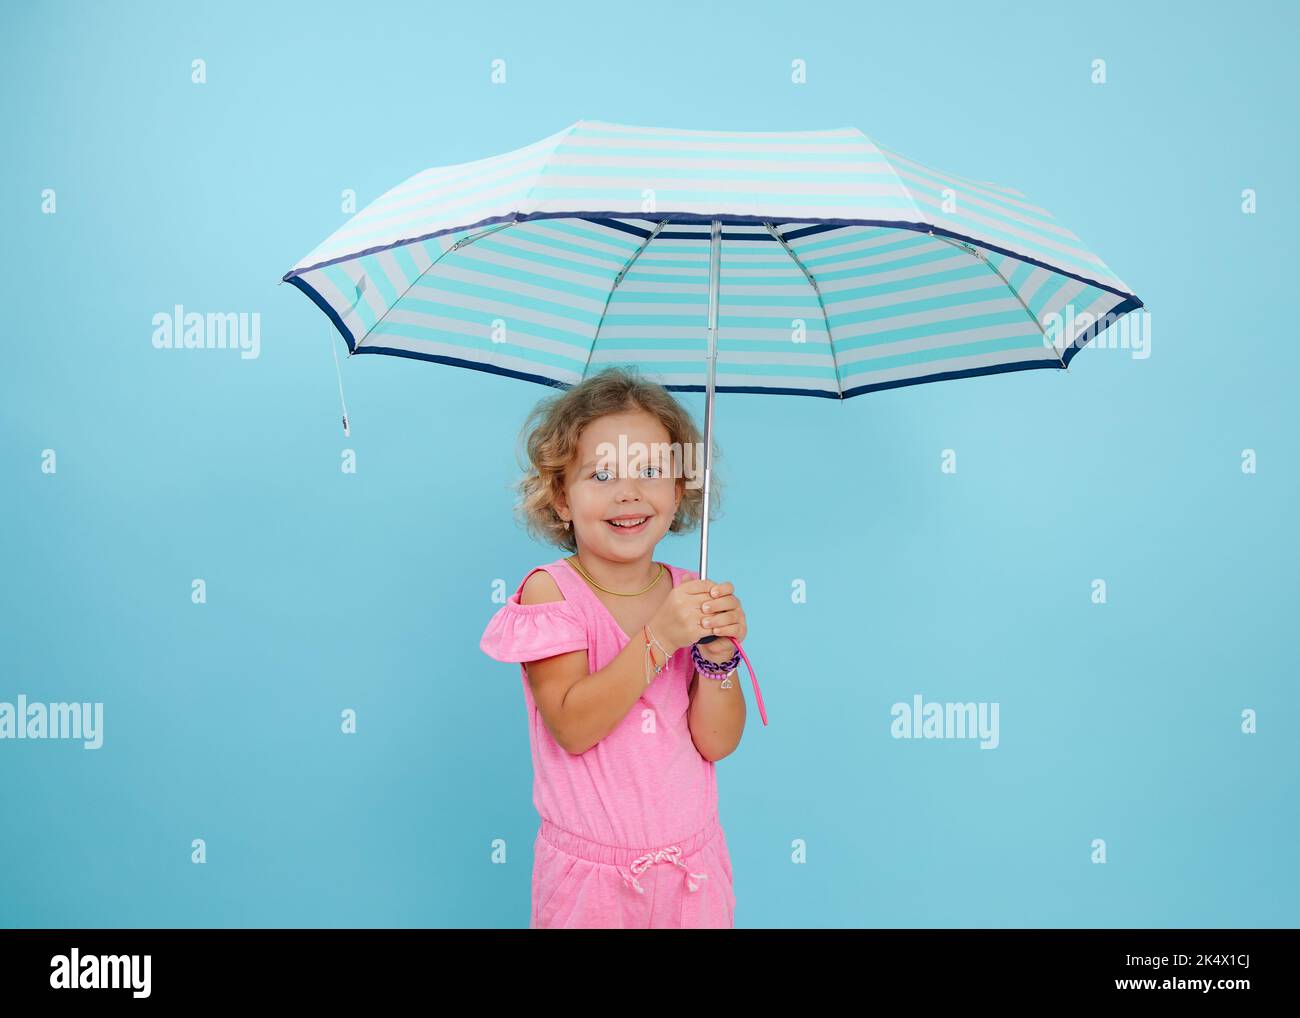 Portrait of little girl with curly fair hair wearing pink jumpsuit, holding open striped umbrella on blue background. Stock Photo